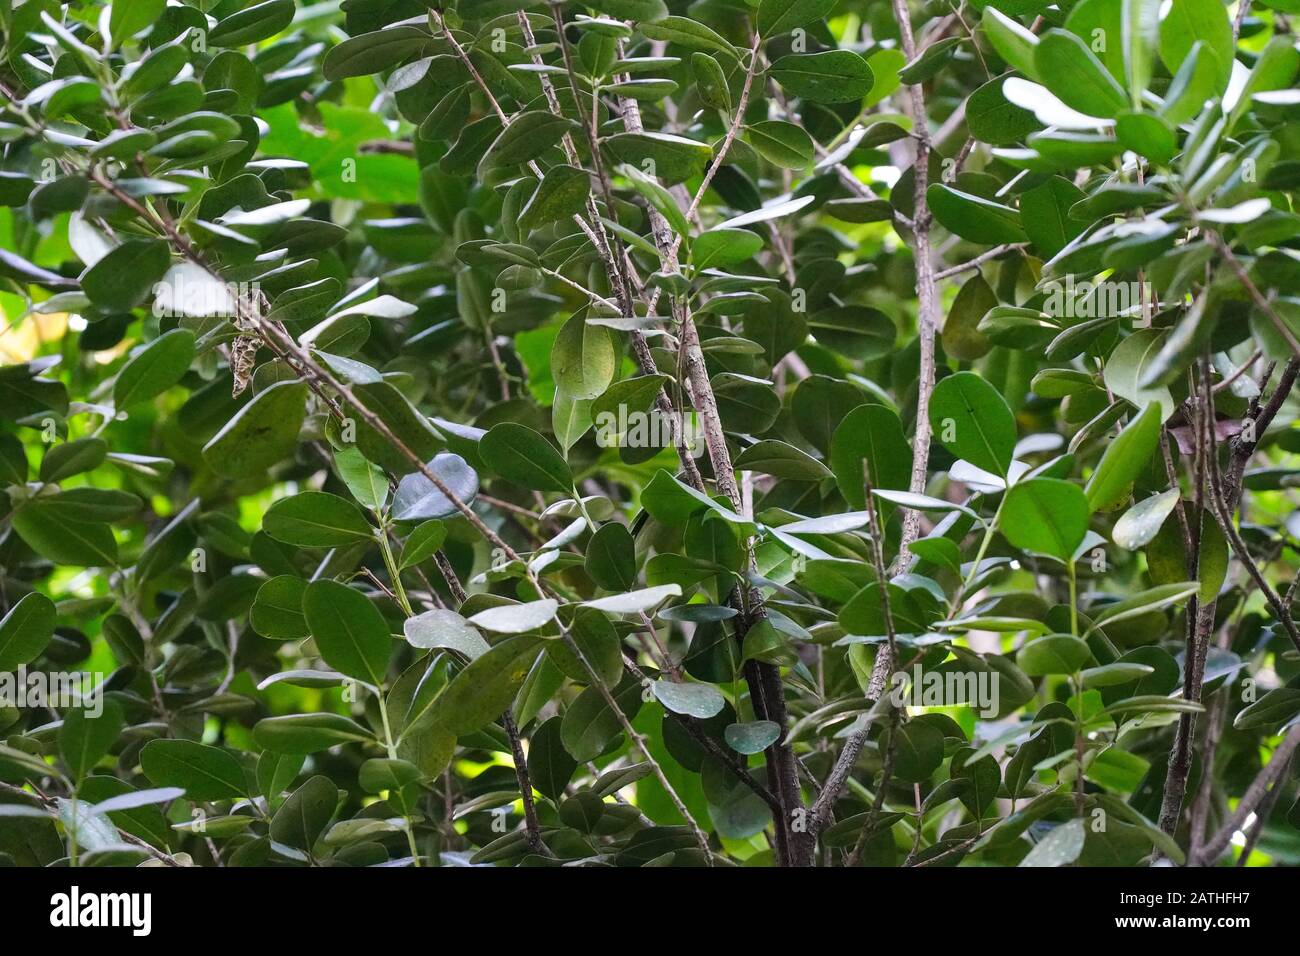 All spice plants. From a series of travel photos in Kerala, South India. Photo date: Sunday, January 12, 2020. Photo: Roger Garfield/Alamy Stock Photo